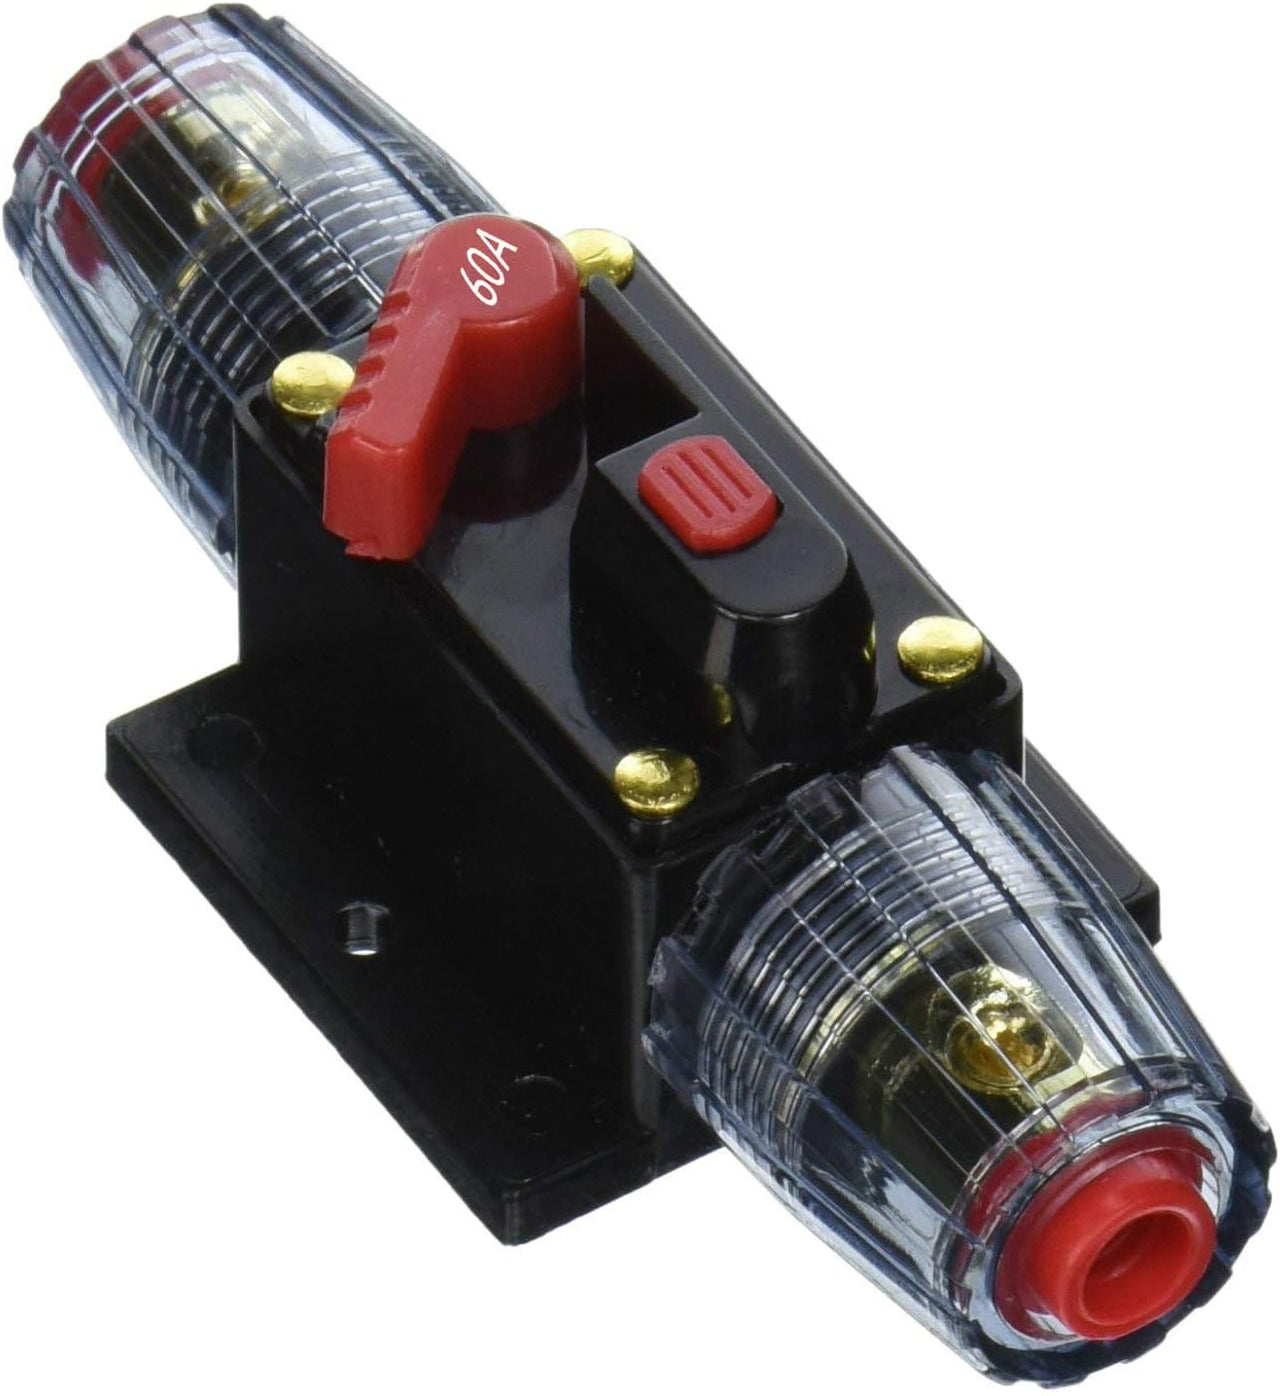 2 Absolute ICB80 4/8 AWG 80 Amp in-line Circuit Breaker with Manual Reset with Manual Reset Car Auto Marine Boat Stereo